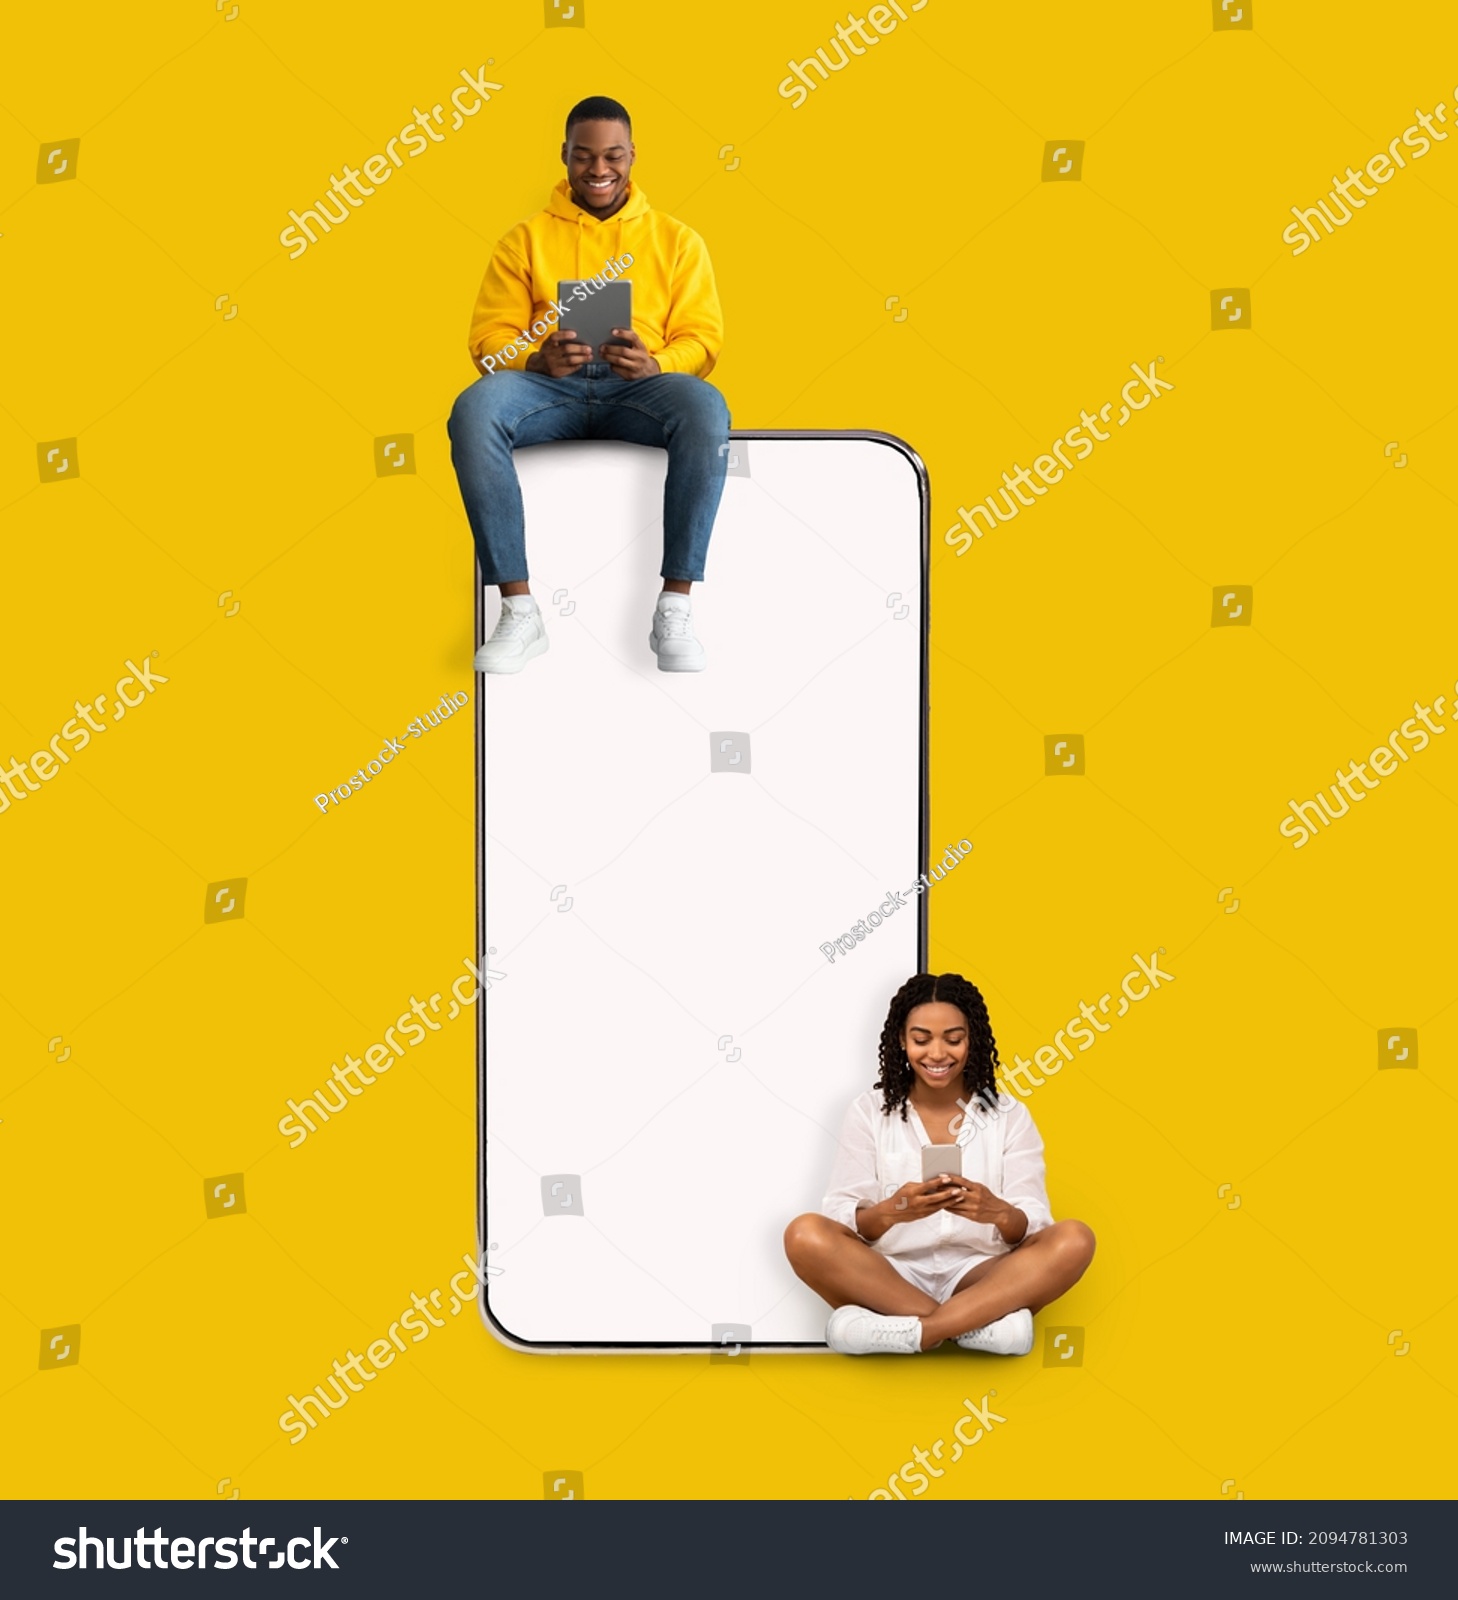 Great App. Excited Black Couple Sitting On Big Smartphone With Blank White Screen Using Gadgets, Cheerful Guy And Lady Chatting On Social Media, Yellow Orange Wall, Mock Up. Modern Communication #2094781303